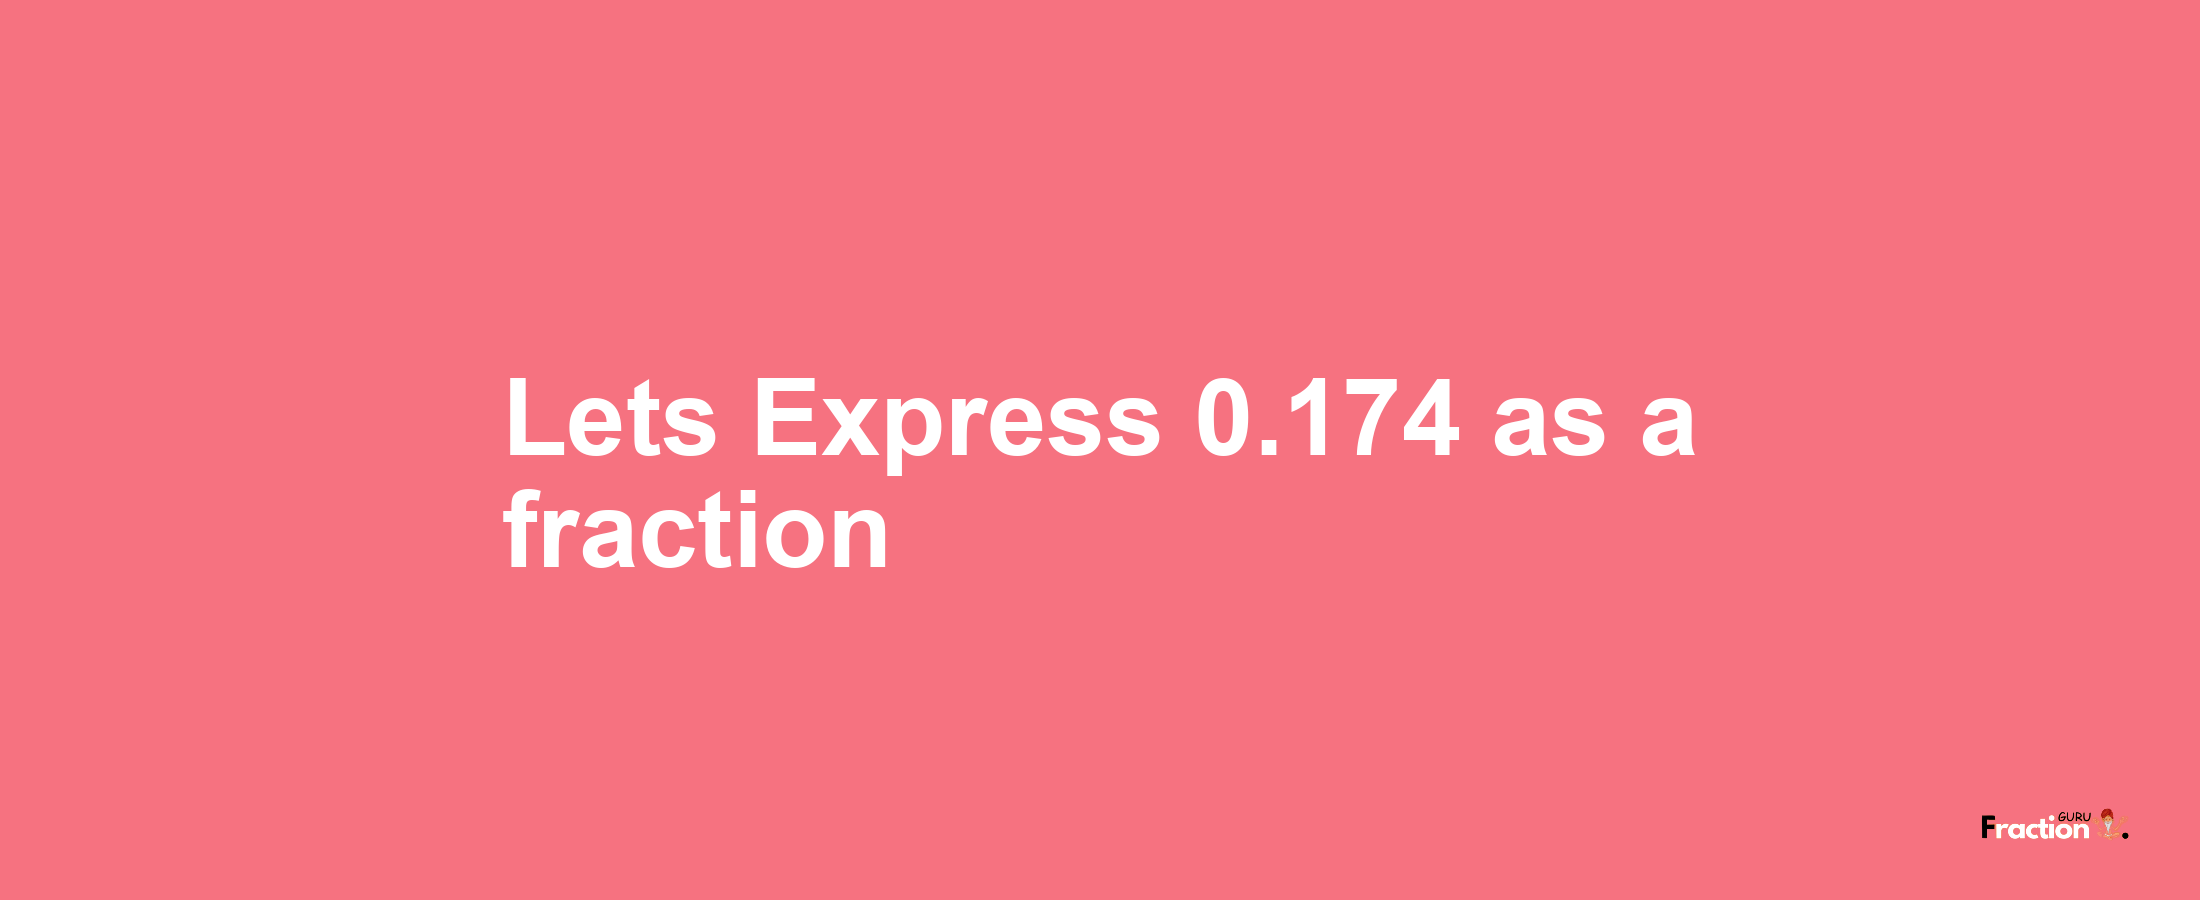 Lets Express 0.174 as afraction